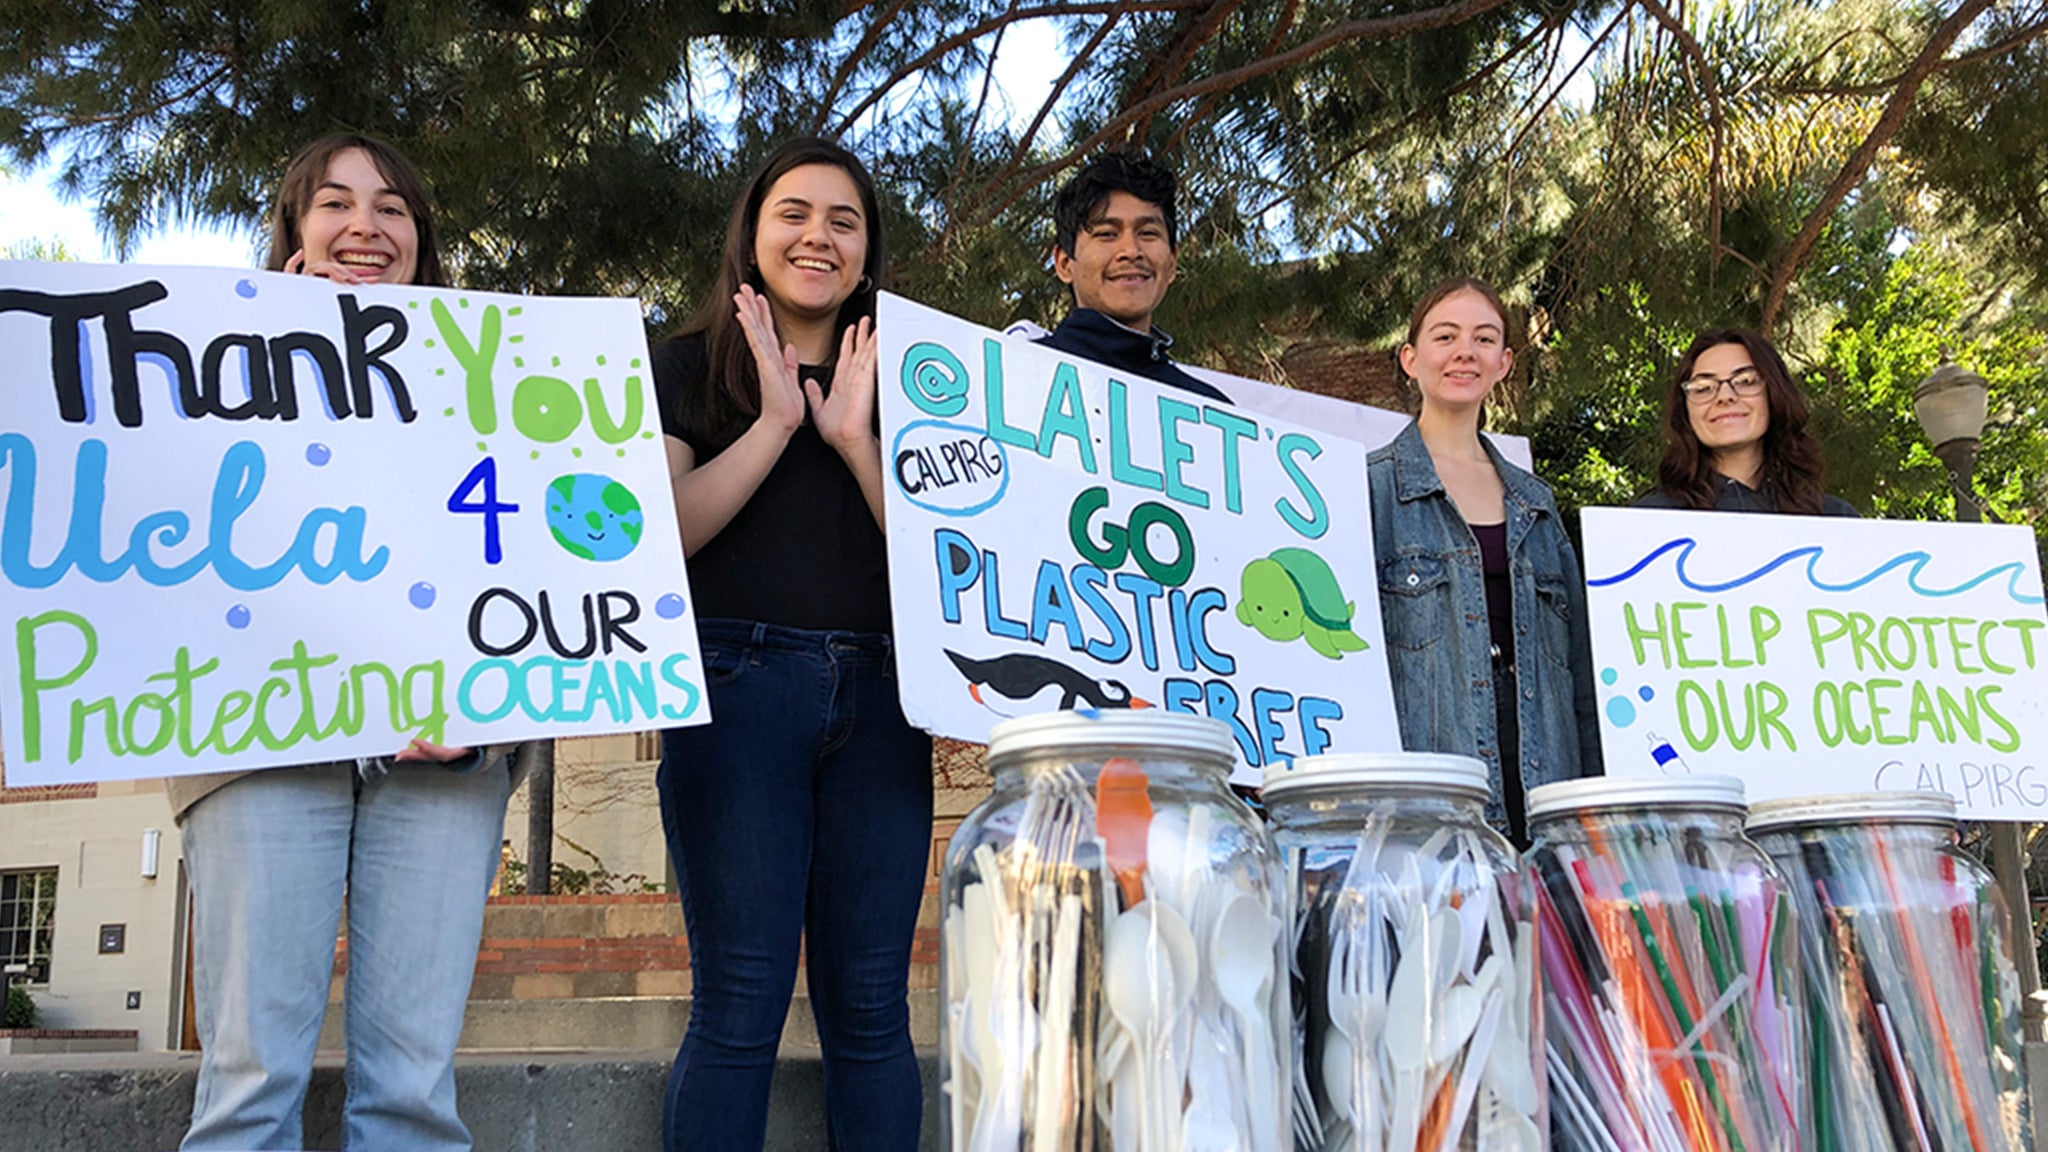 Students hold signs that encourage phasing out single-use plastic utensils and straws.